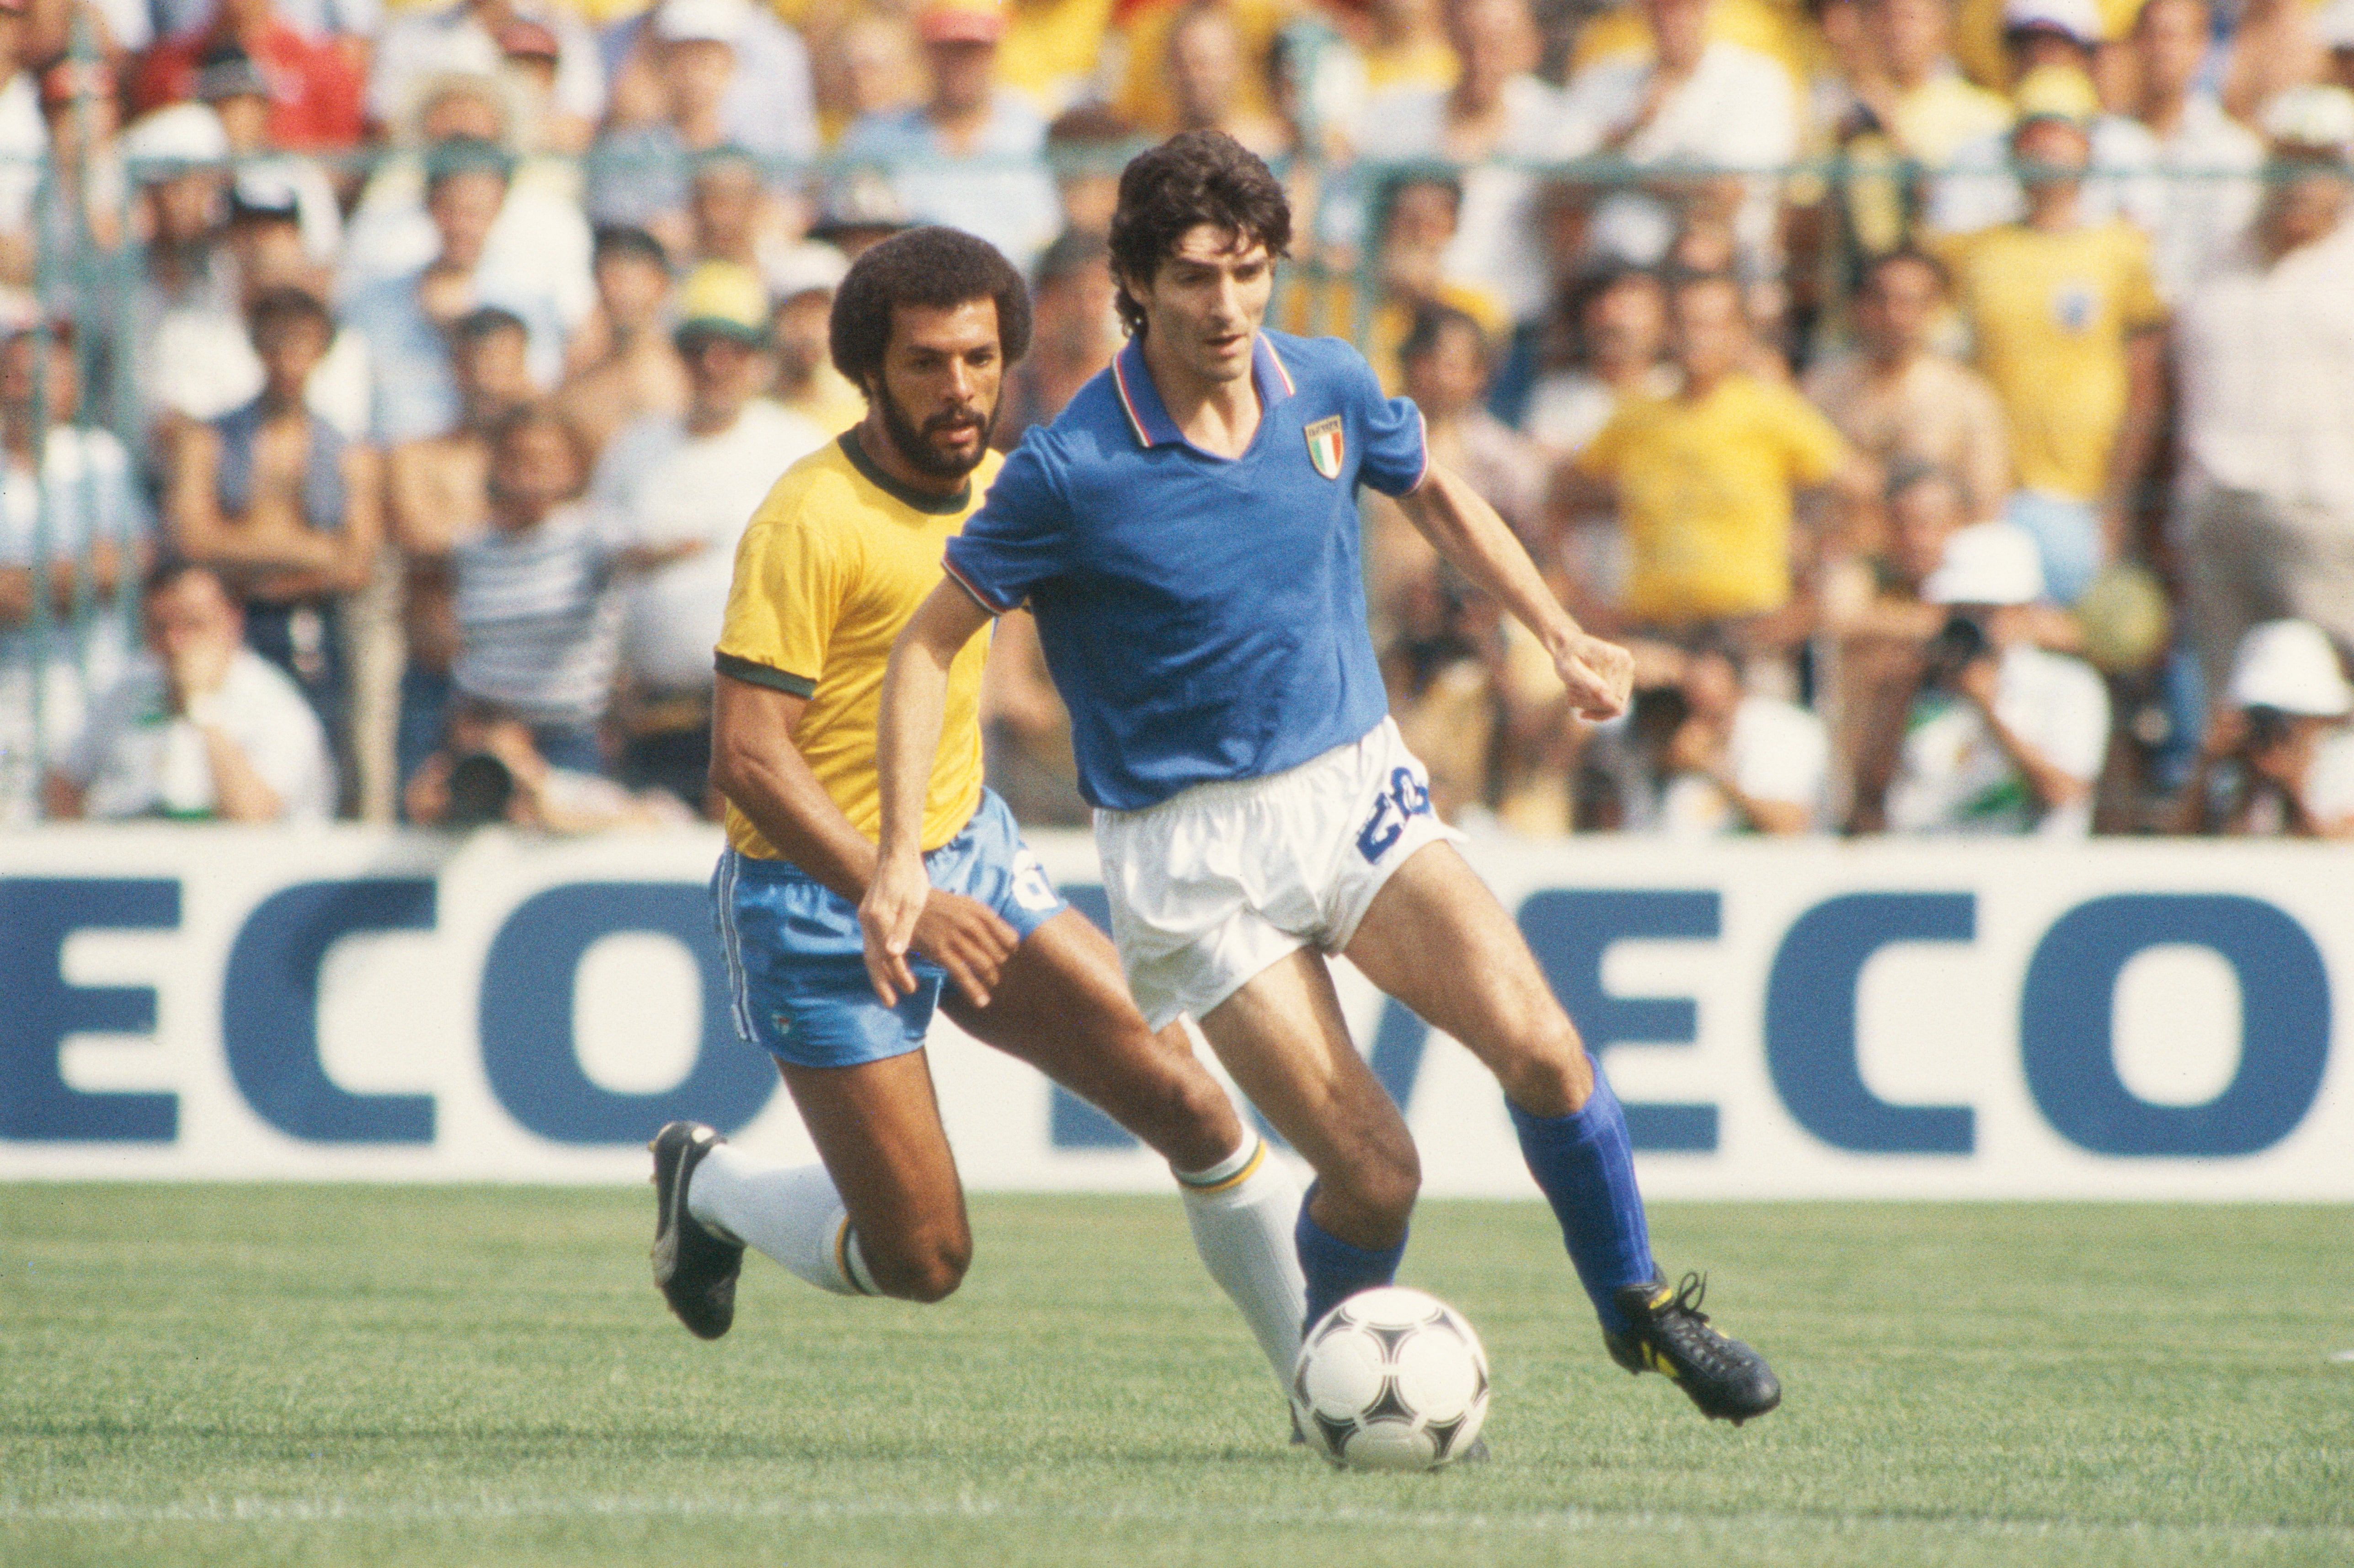 Paolo Rossi Fallen football idol who won redemption at the World Cup The Independent